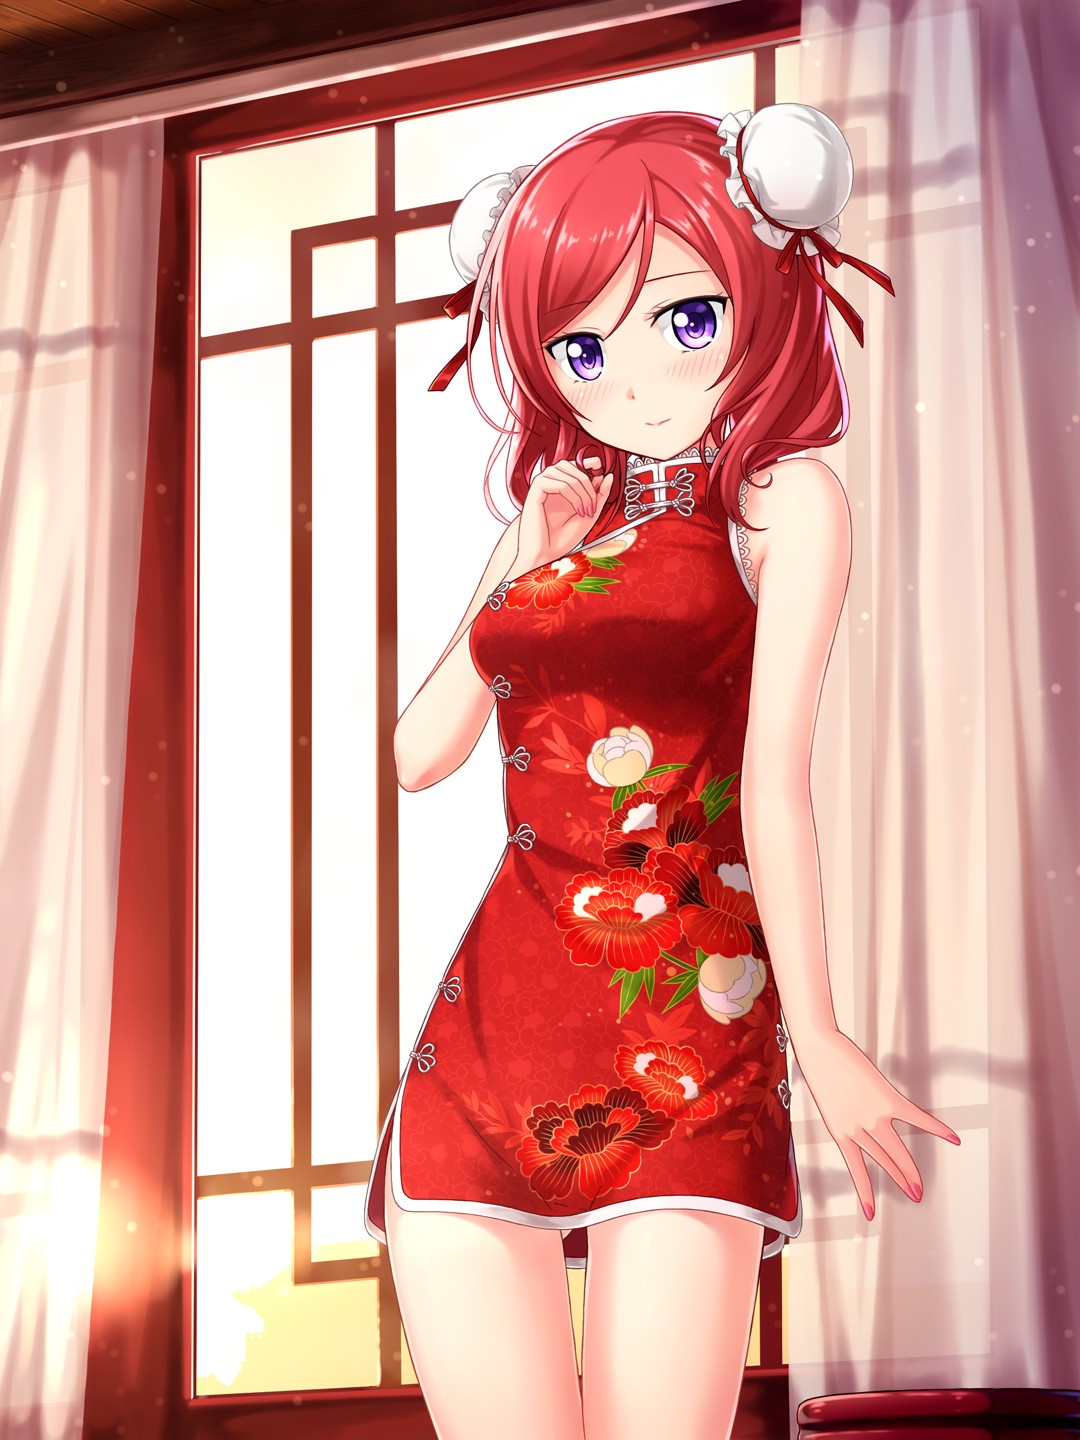 Anime 1080x1440 anime anime girls Love Live! redhead purple eyes short hair Nishikino Maki Pixiv red dress dress red clothing looking at viewer painted nails